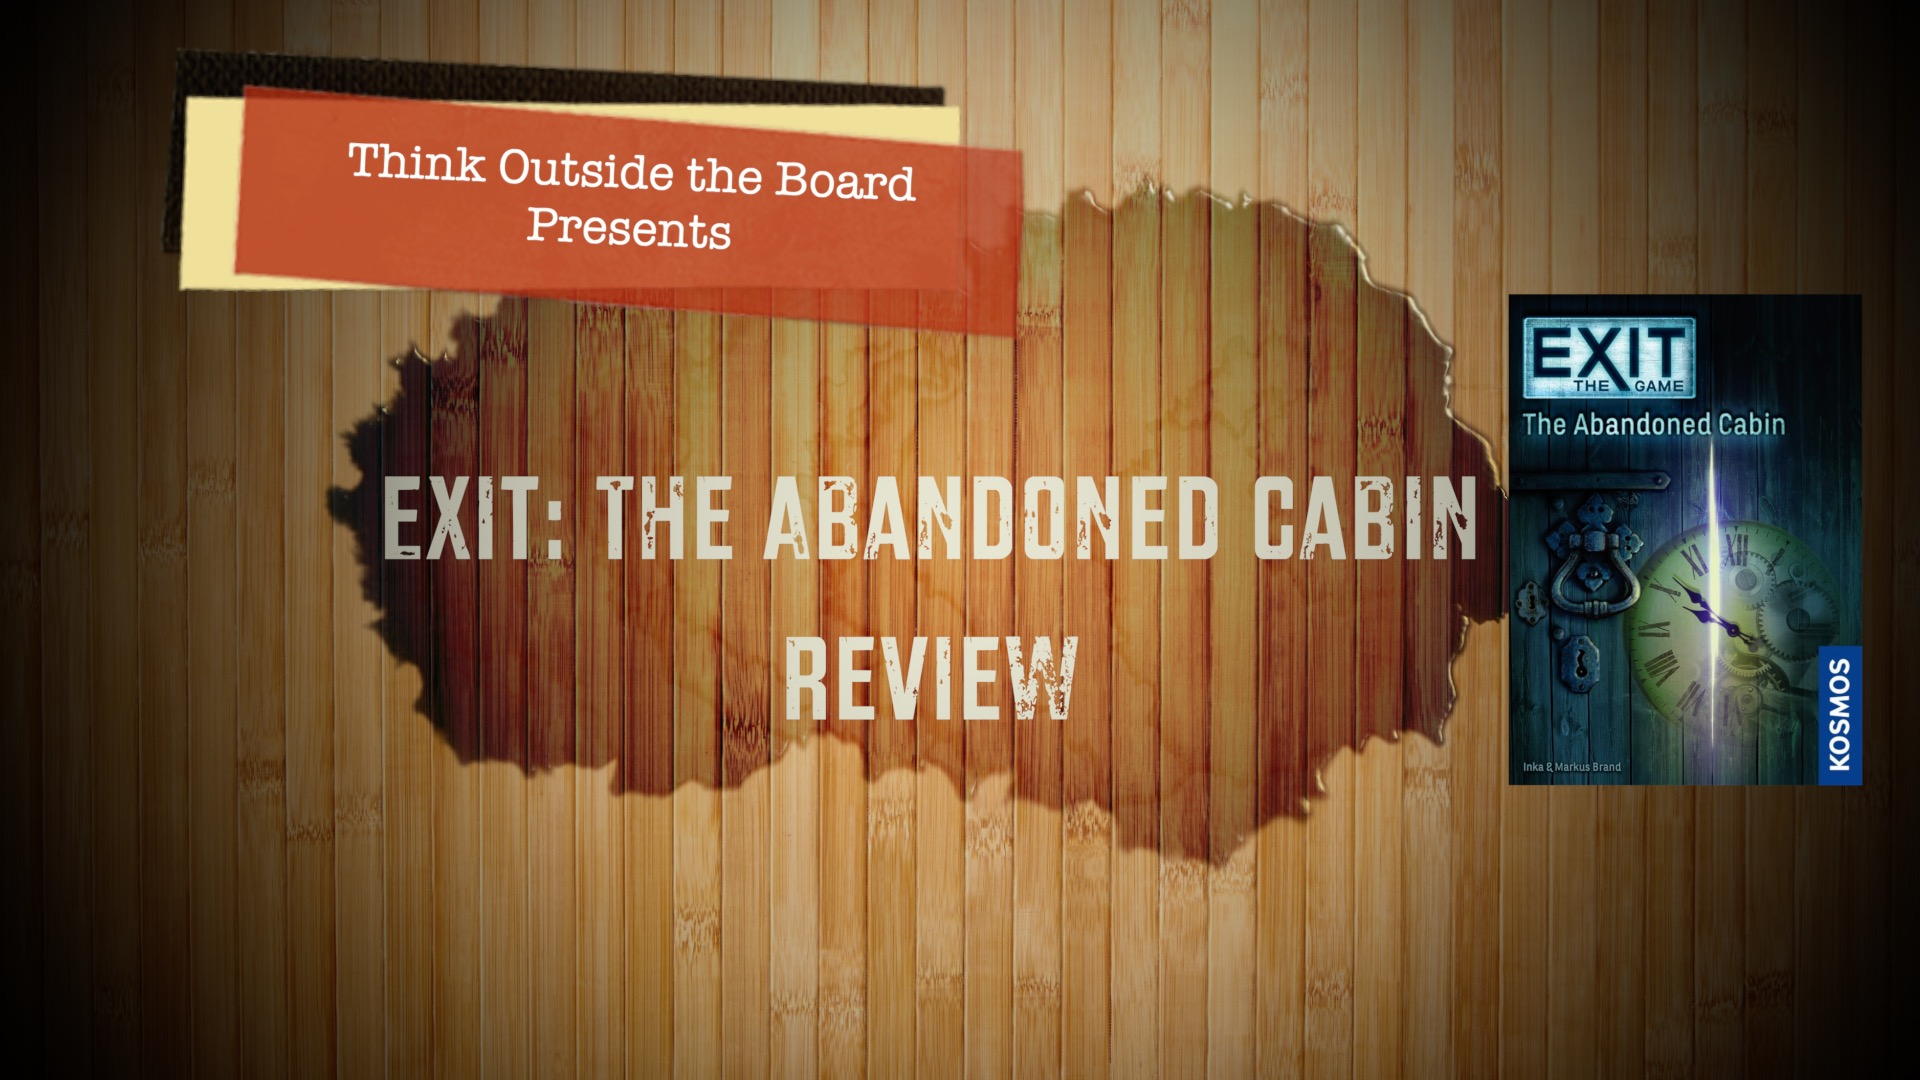 Exit: The Abandoned Cabin Review